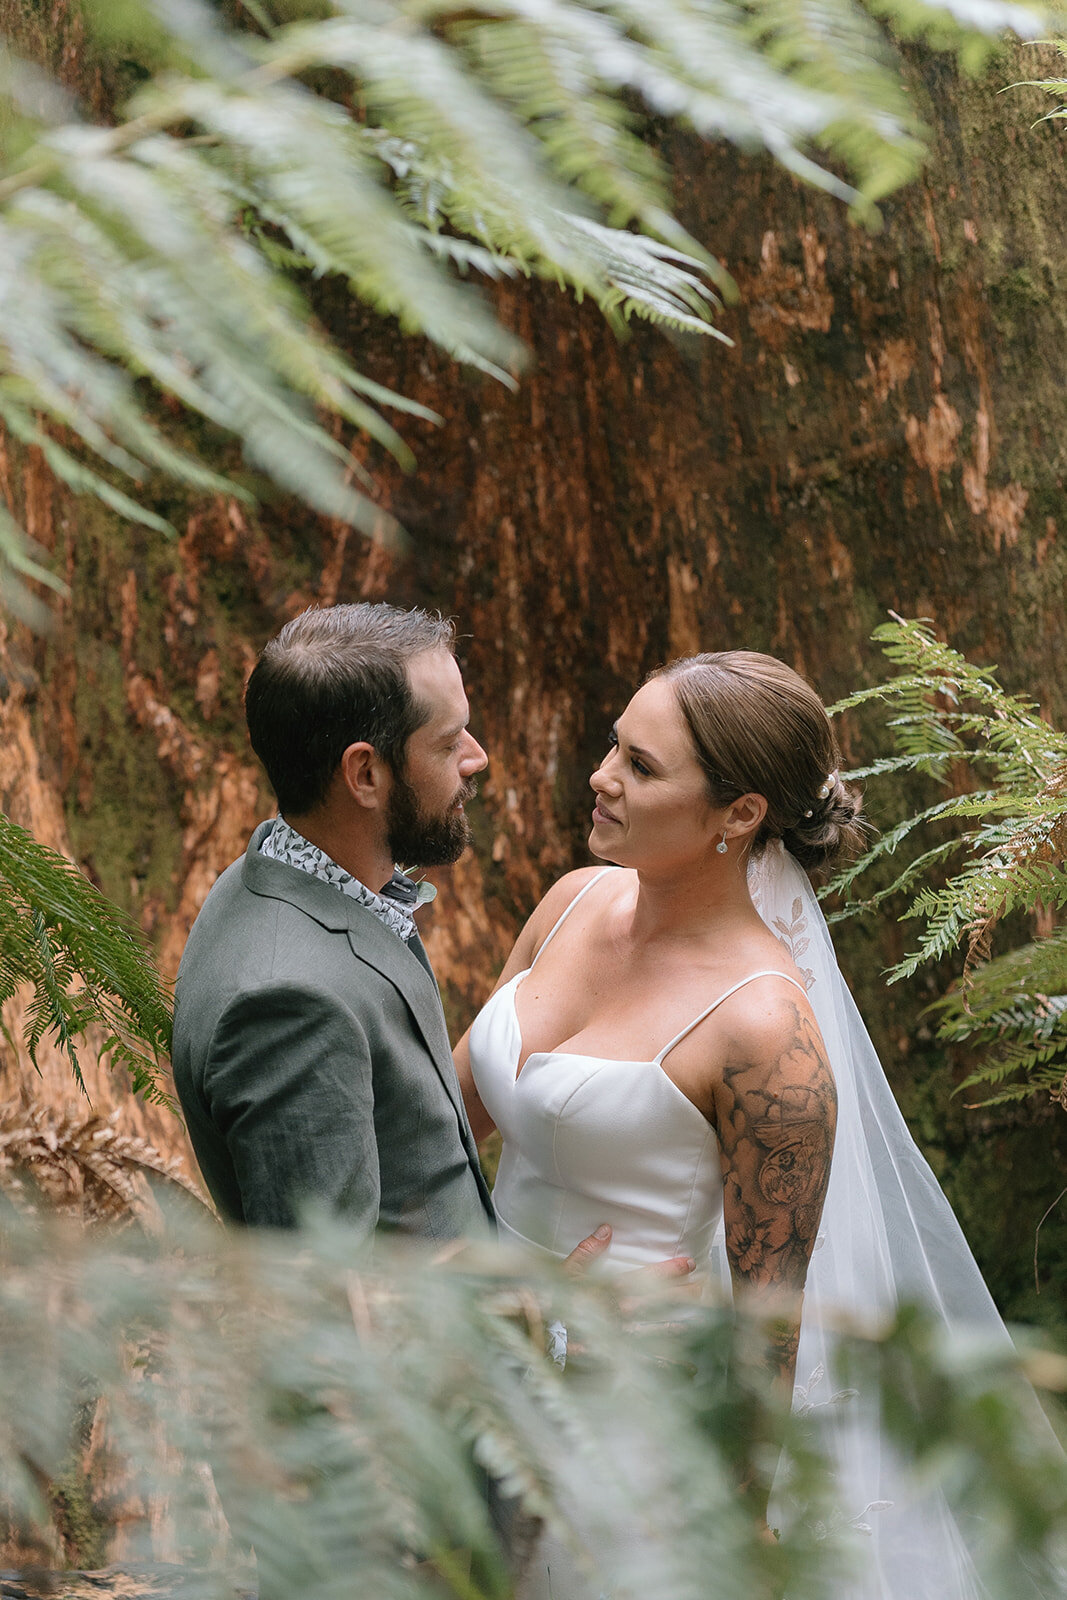 Stacey&Cory-Coast&Pines-88